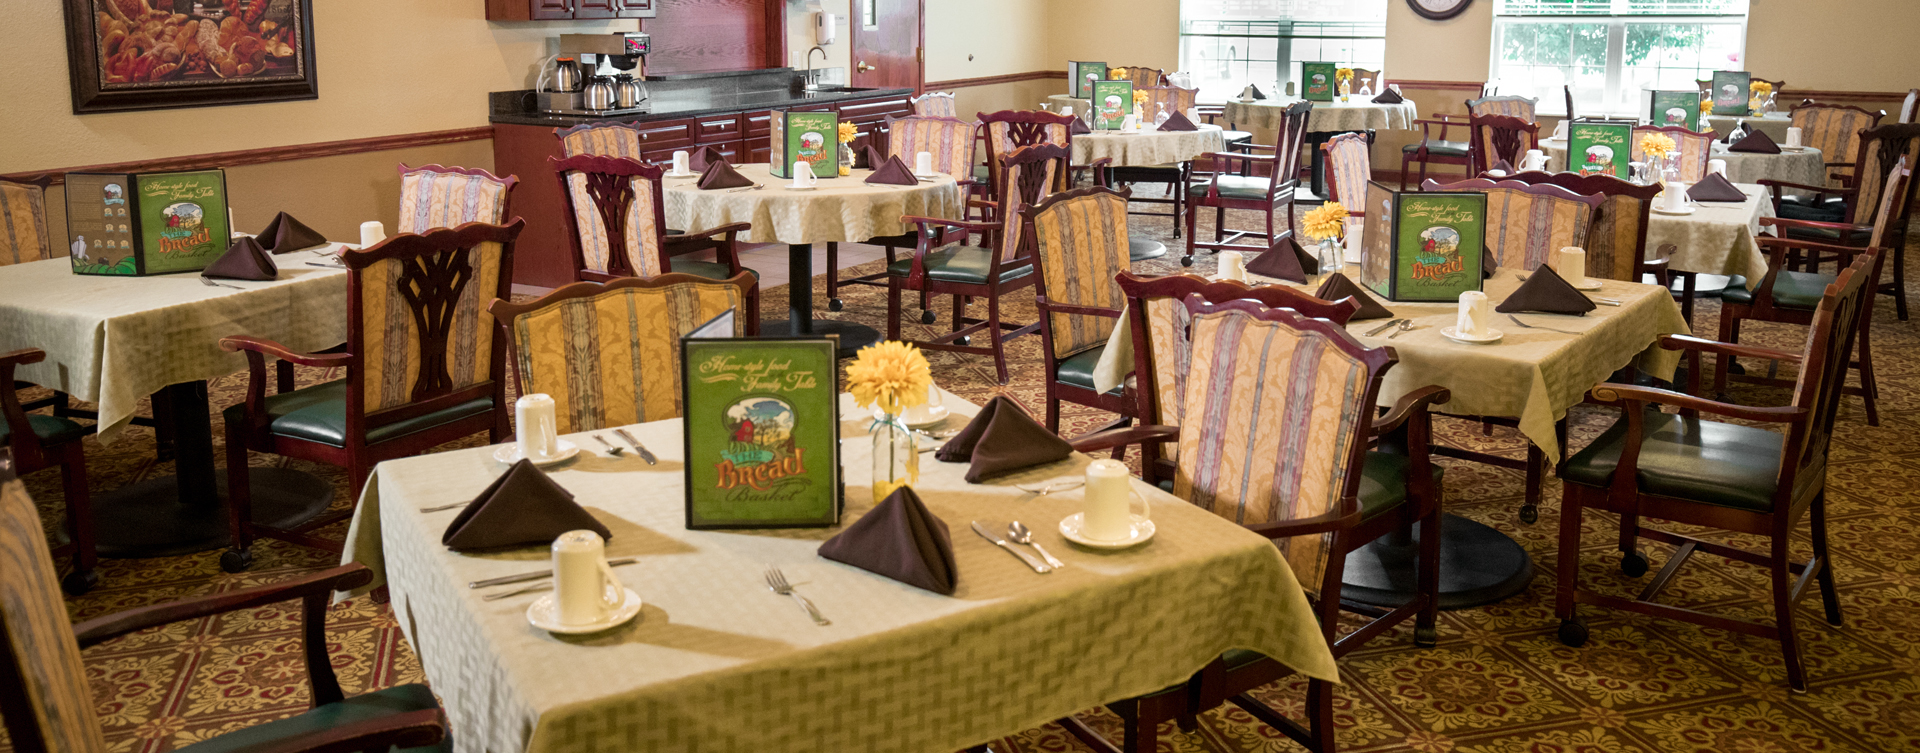 Enjoy homestyle food with made-from-scratch recipes in our dining room at Bickford of Quincy